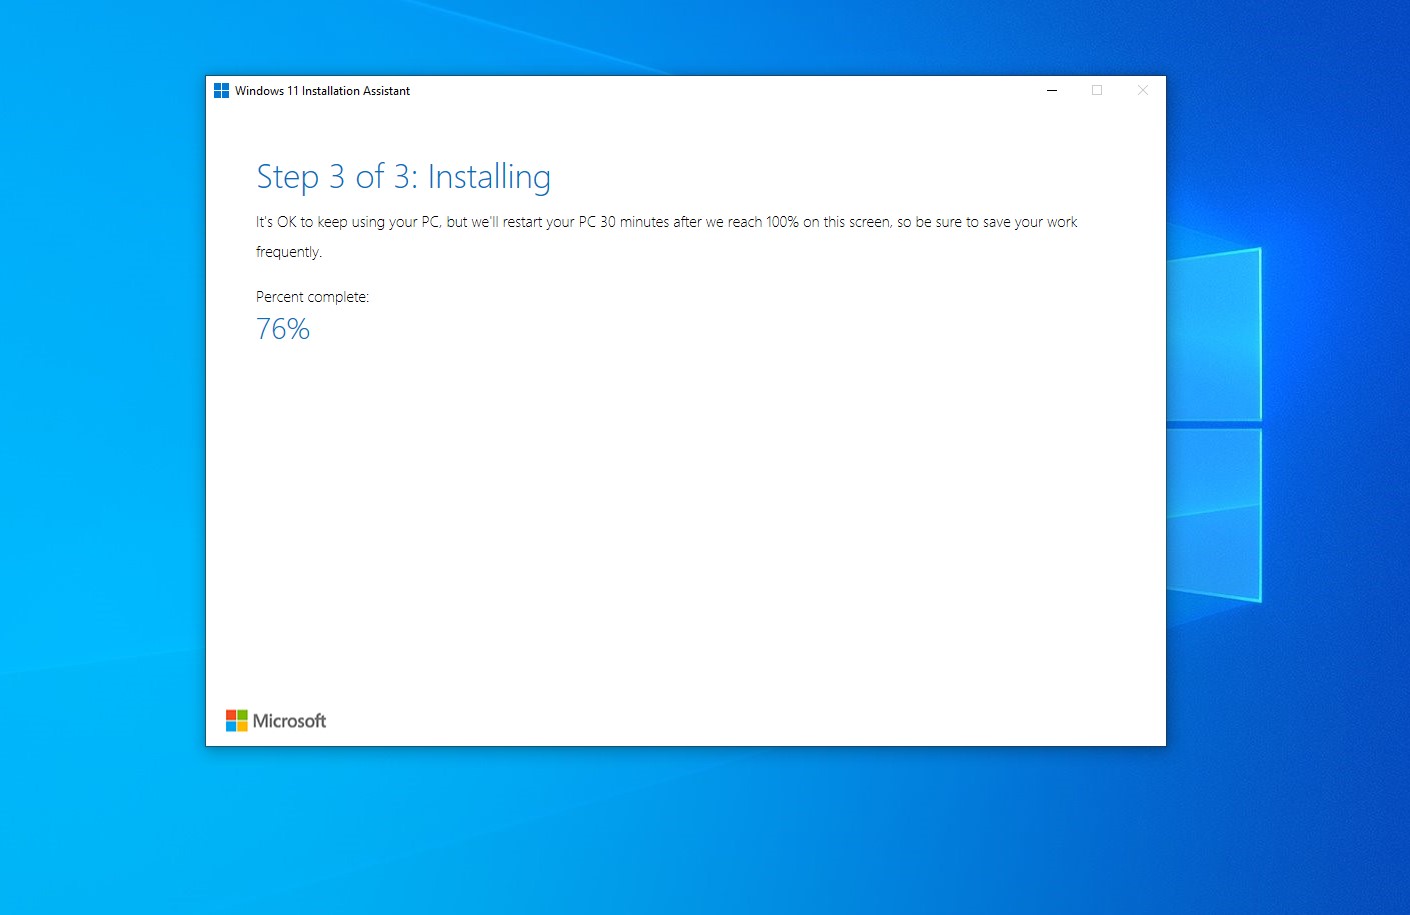 How to download and install Windows 11: All methods, explained